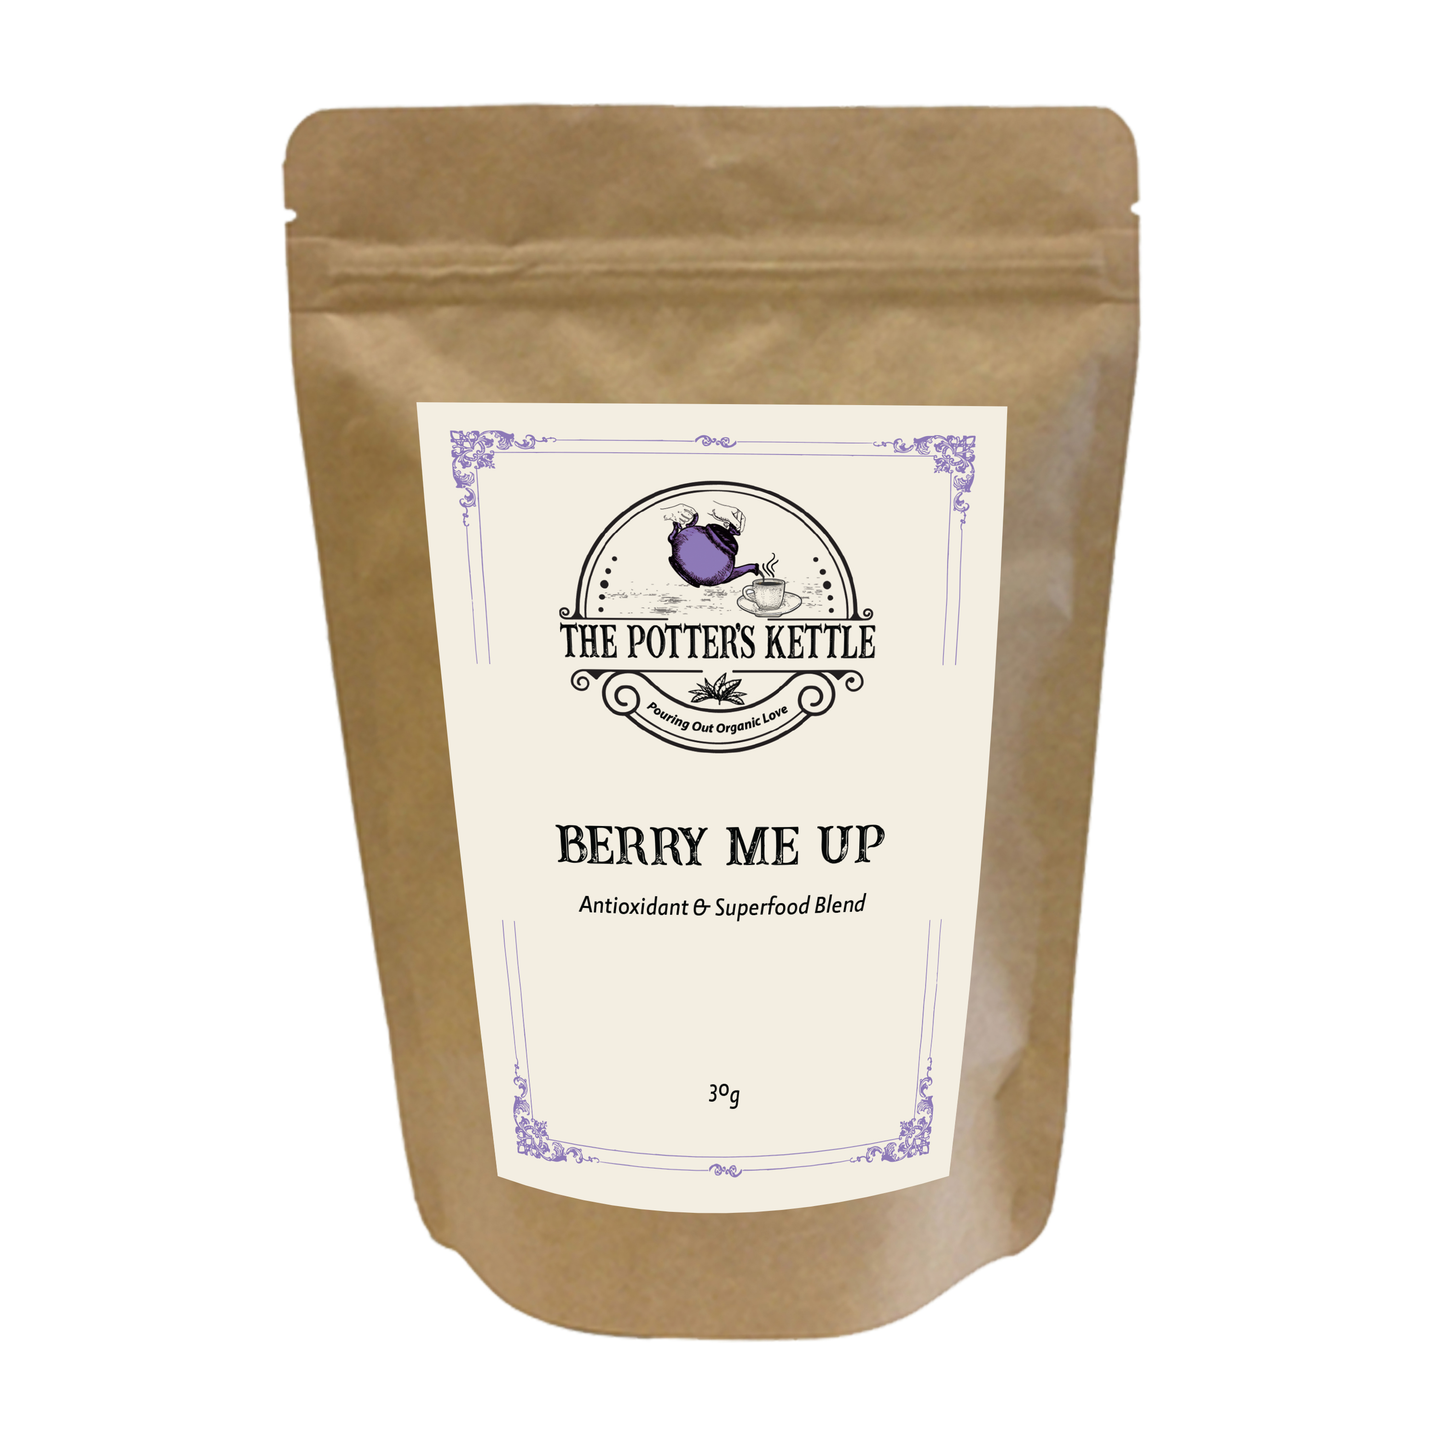 Berry Me Up Antioxidant & Superfood Blend